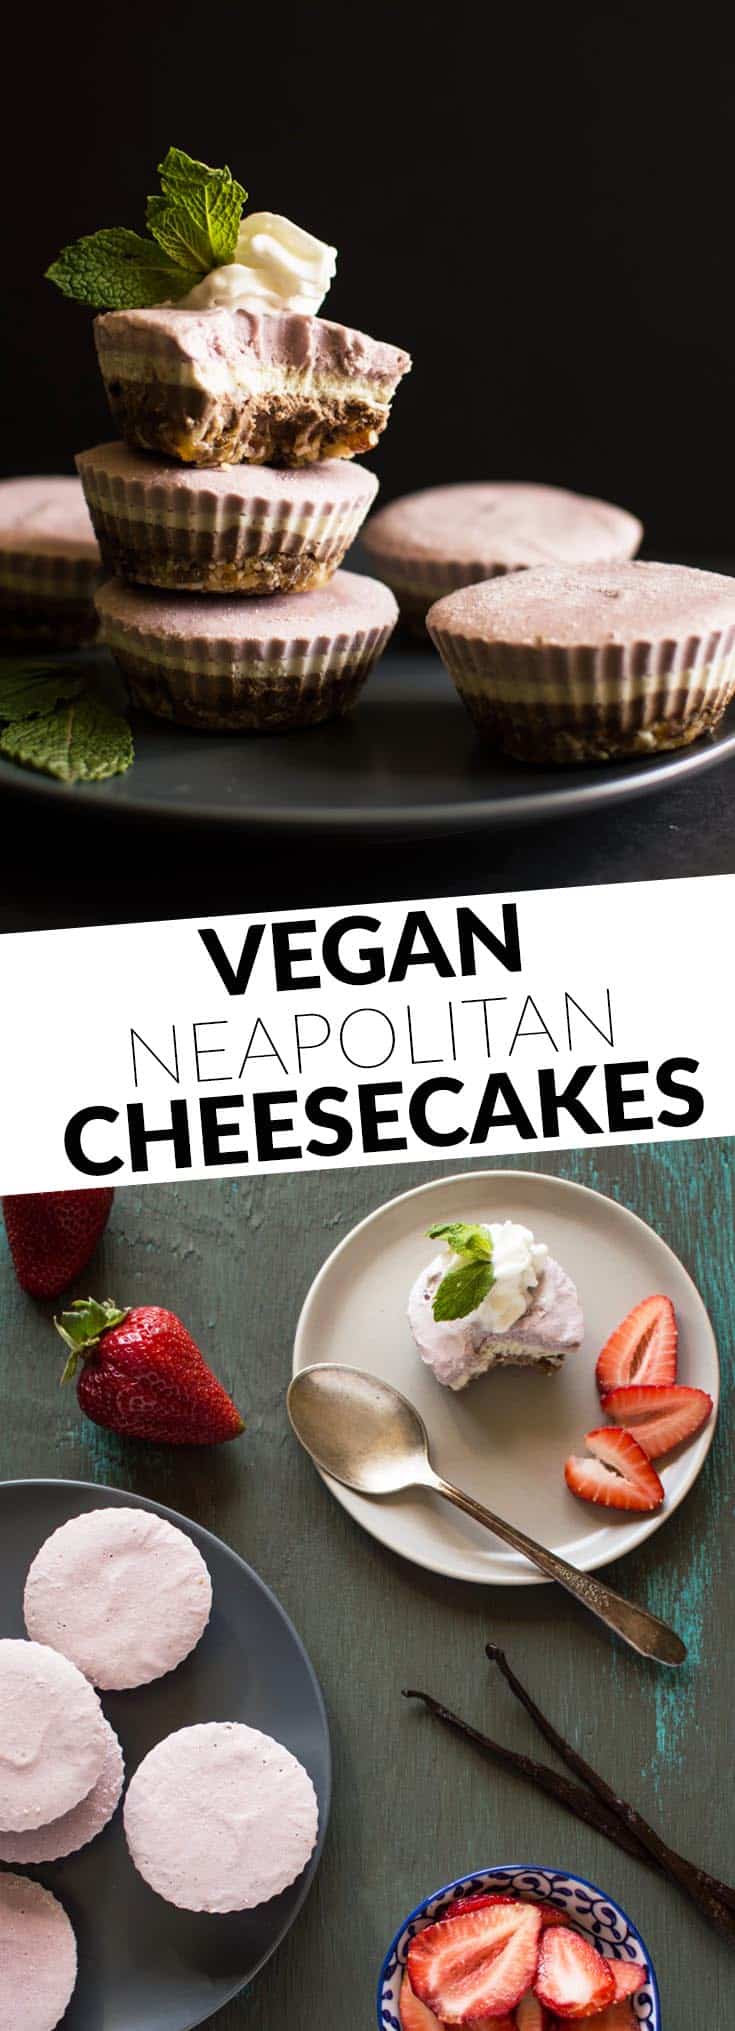 Delicious and creamy Vegan Neapolitan Cheesecake - the perfect healthy dessert! by @healthynibs